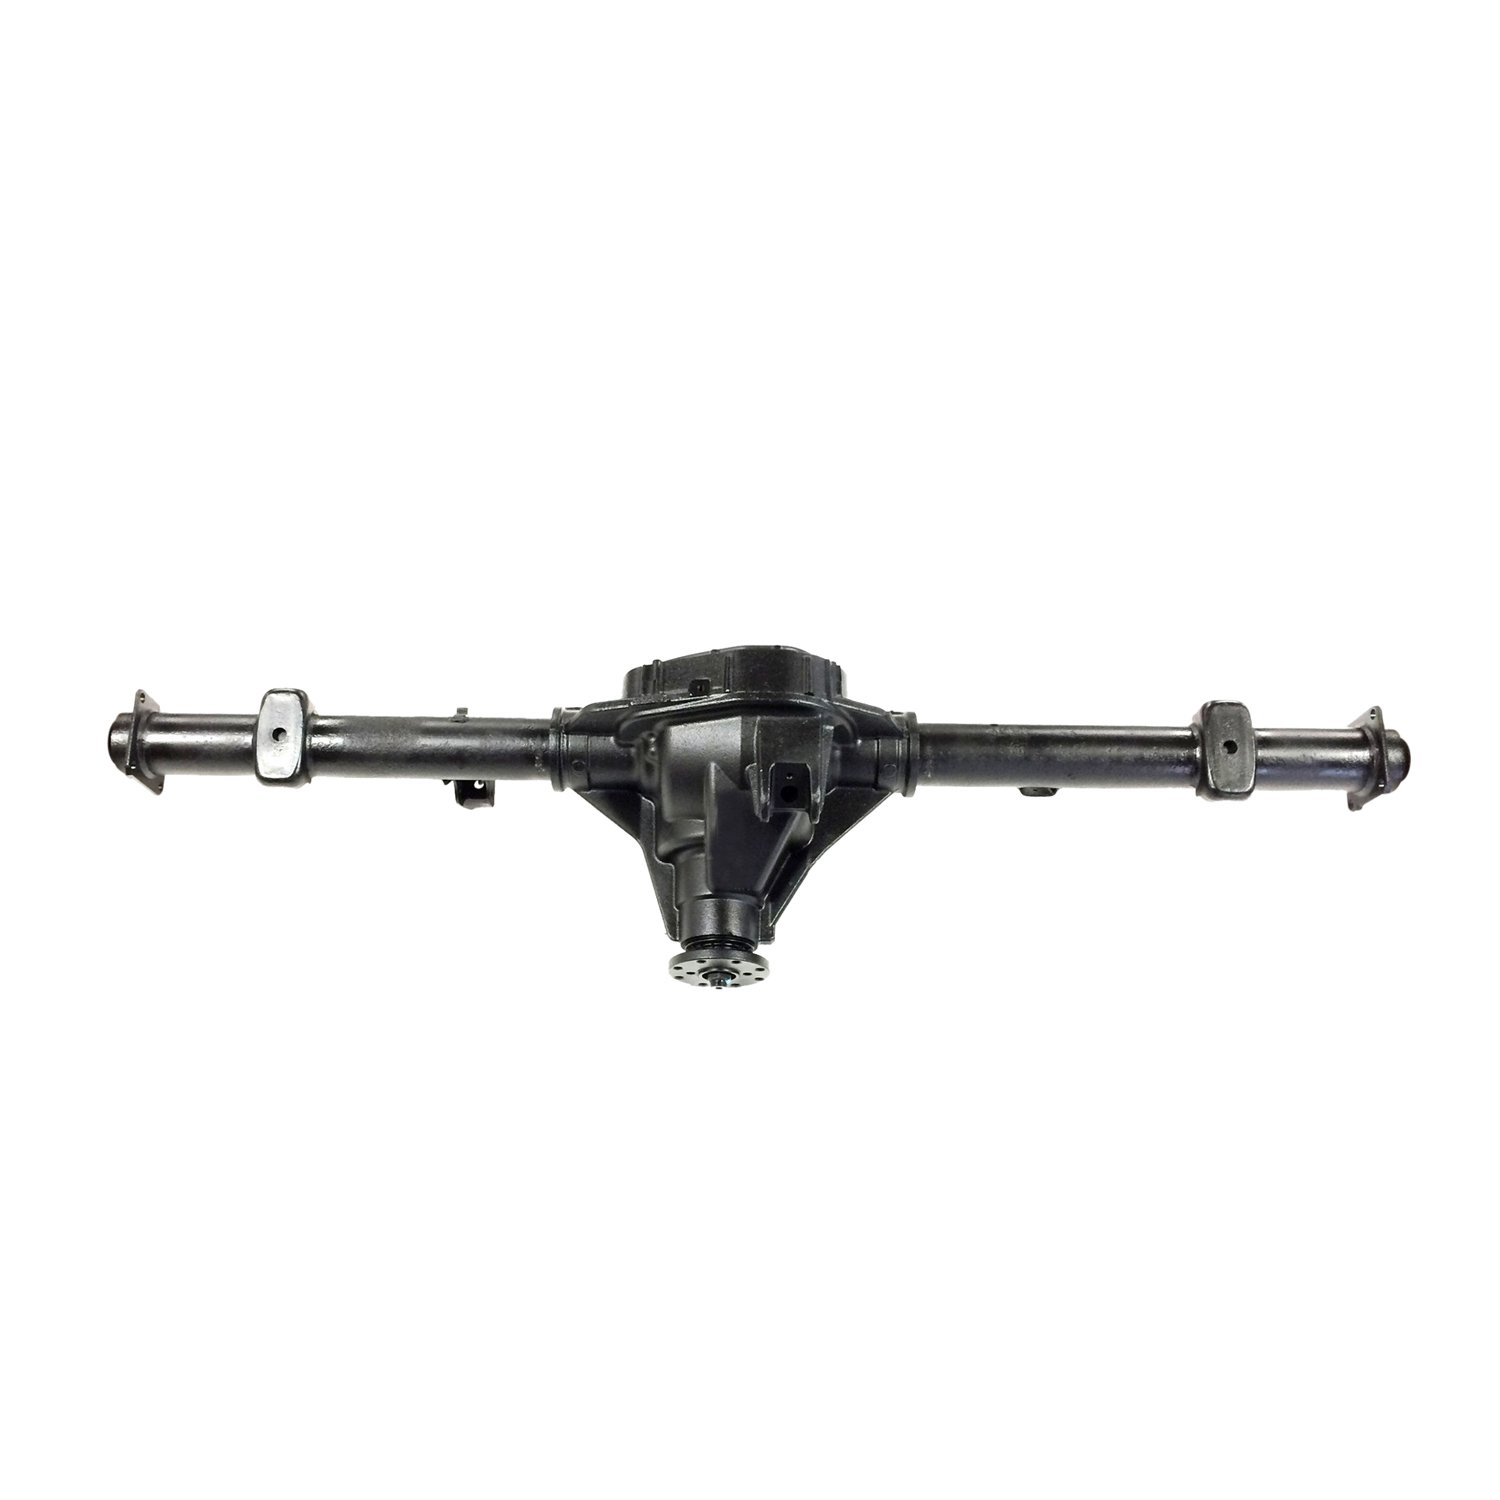 Remanufactured Complete Axle Assembly for 9.75" 09-11 F150 3.15, 6 Lug, Posi LSD